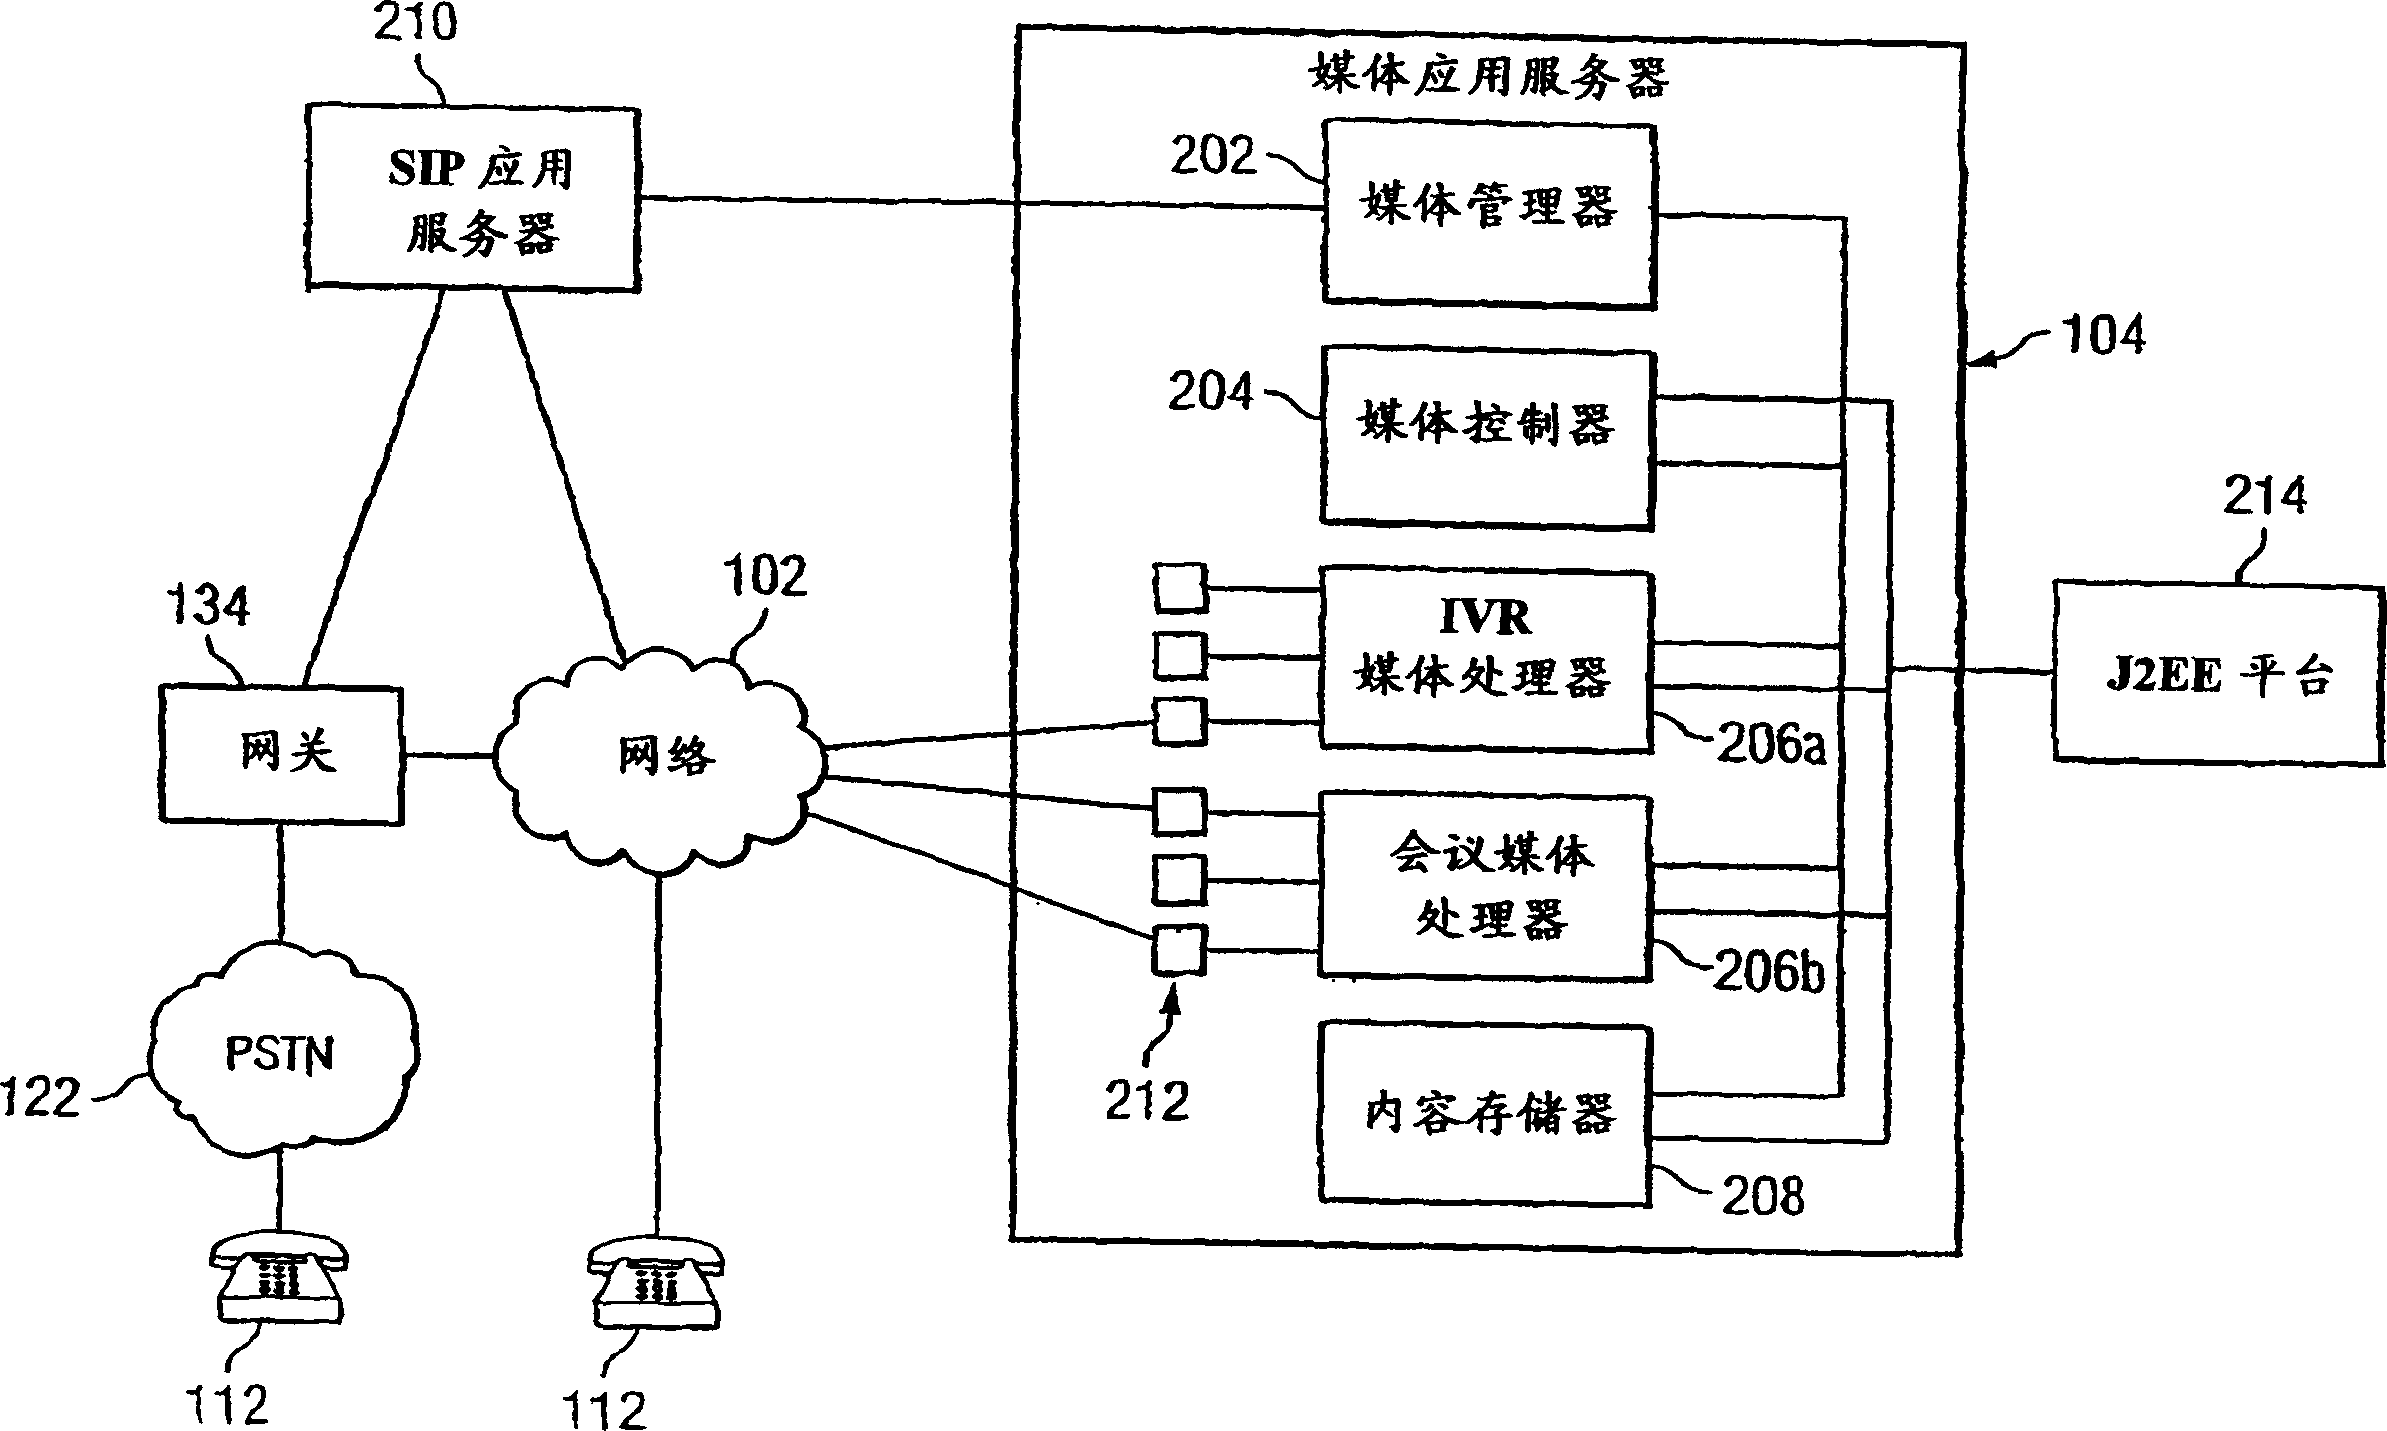 Method and system for providing network synchronization with a unified messaging system